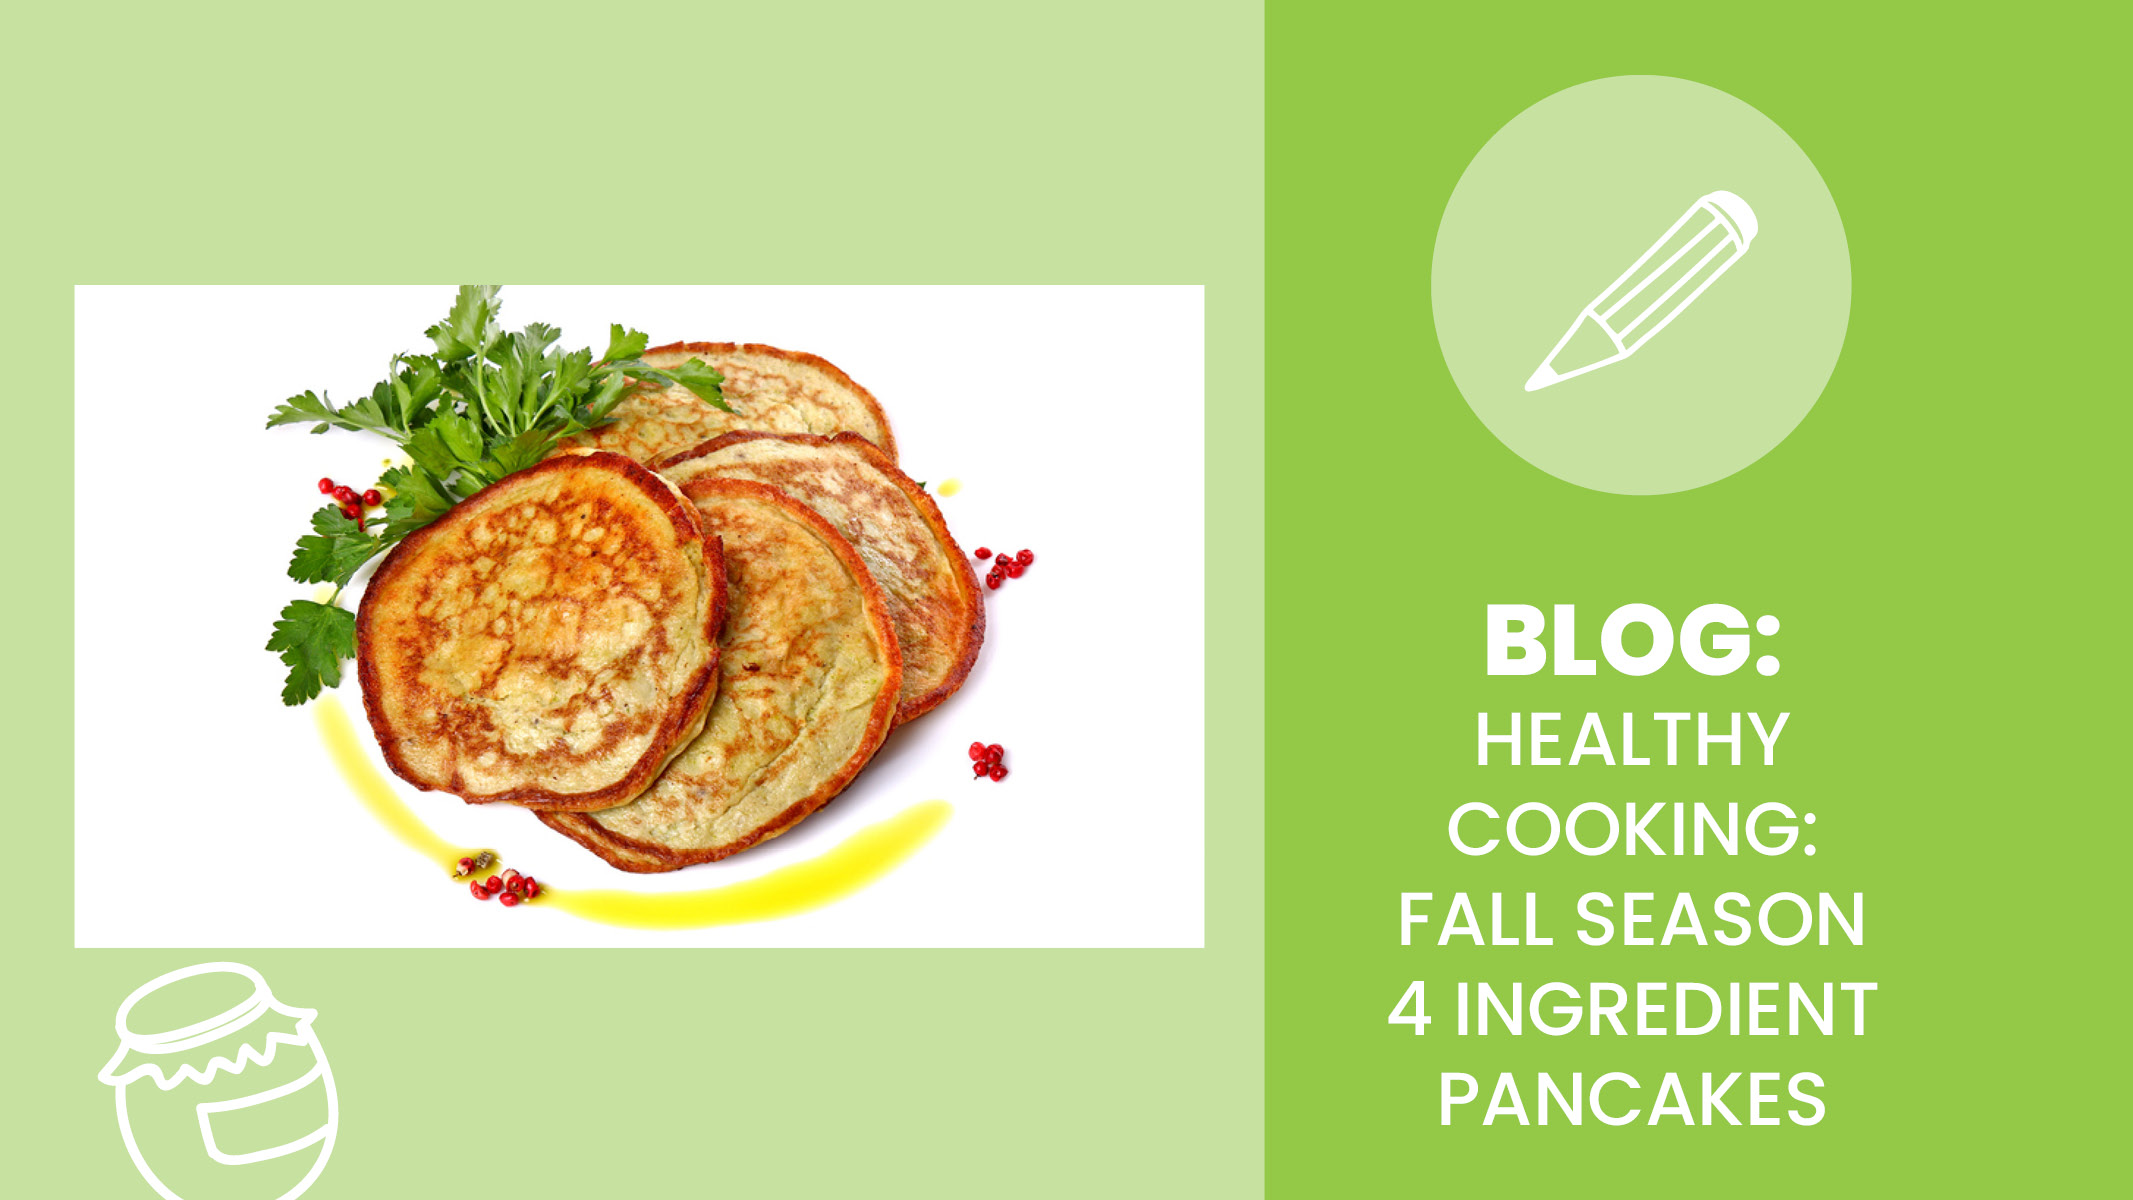 Healthy breakfast with pancakes that only take 4 ingredients